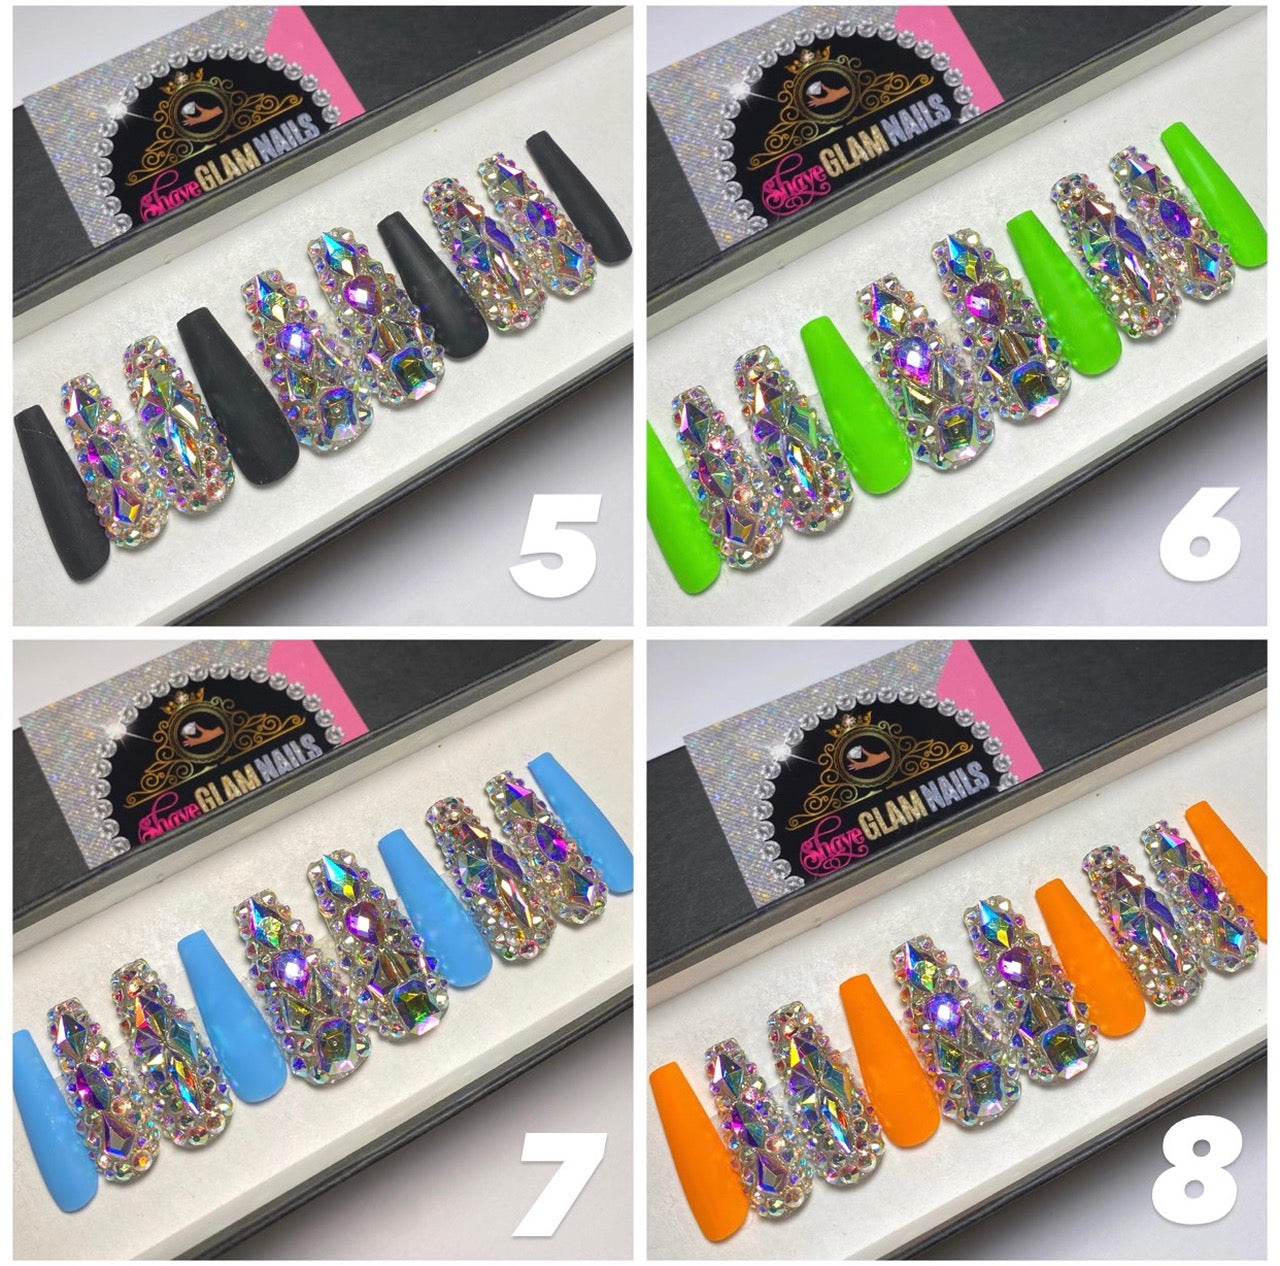 Bling Style - Three Bling Nails